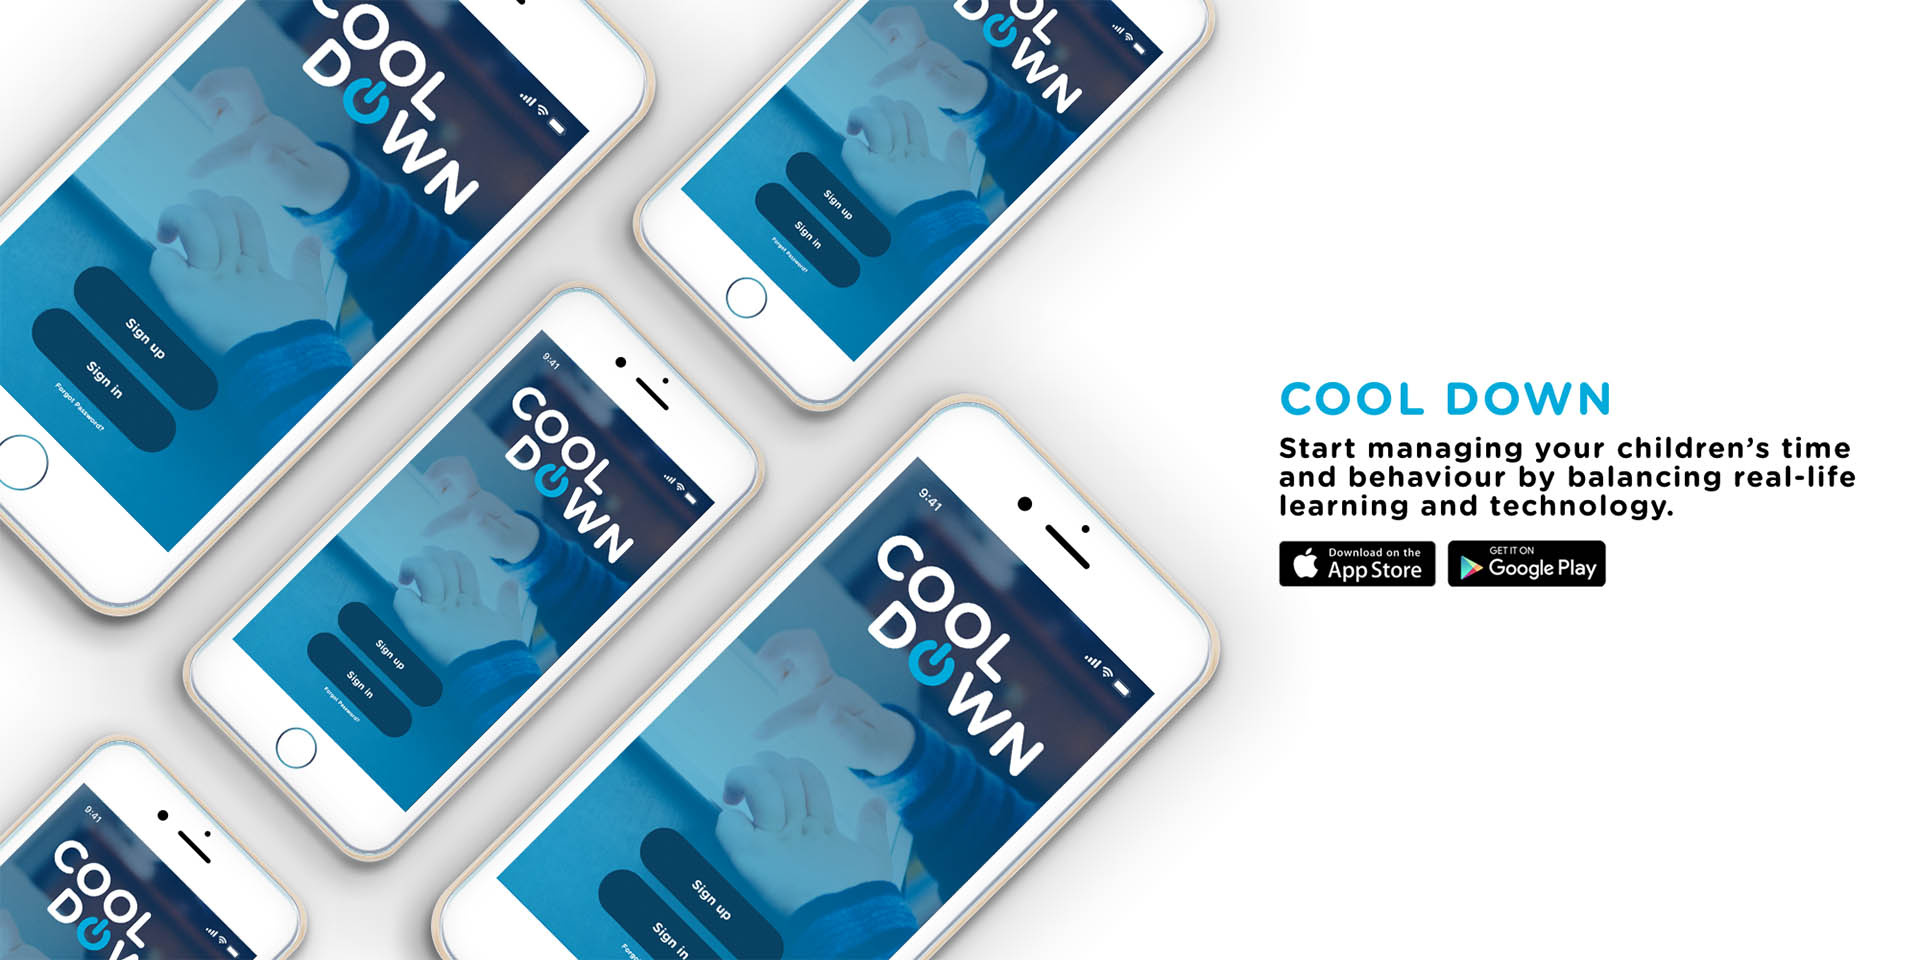 Promotional poster for Cool Down application, to help parents manage their children’s time and behaviour by balancing real-life learning and technology